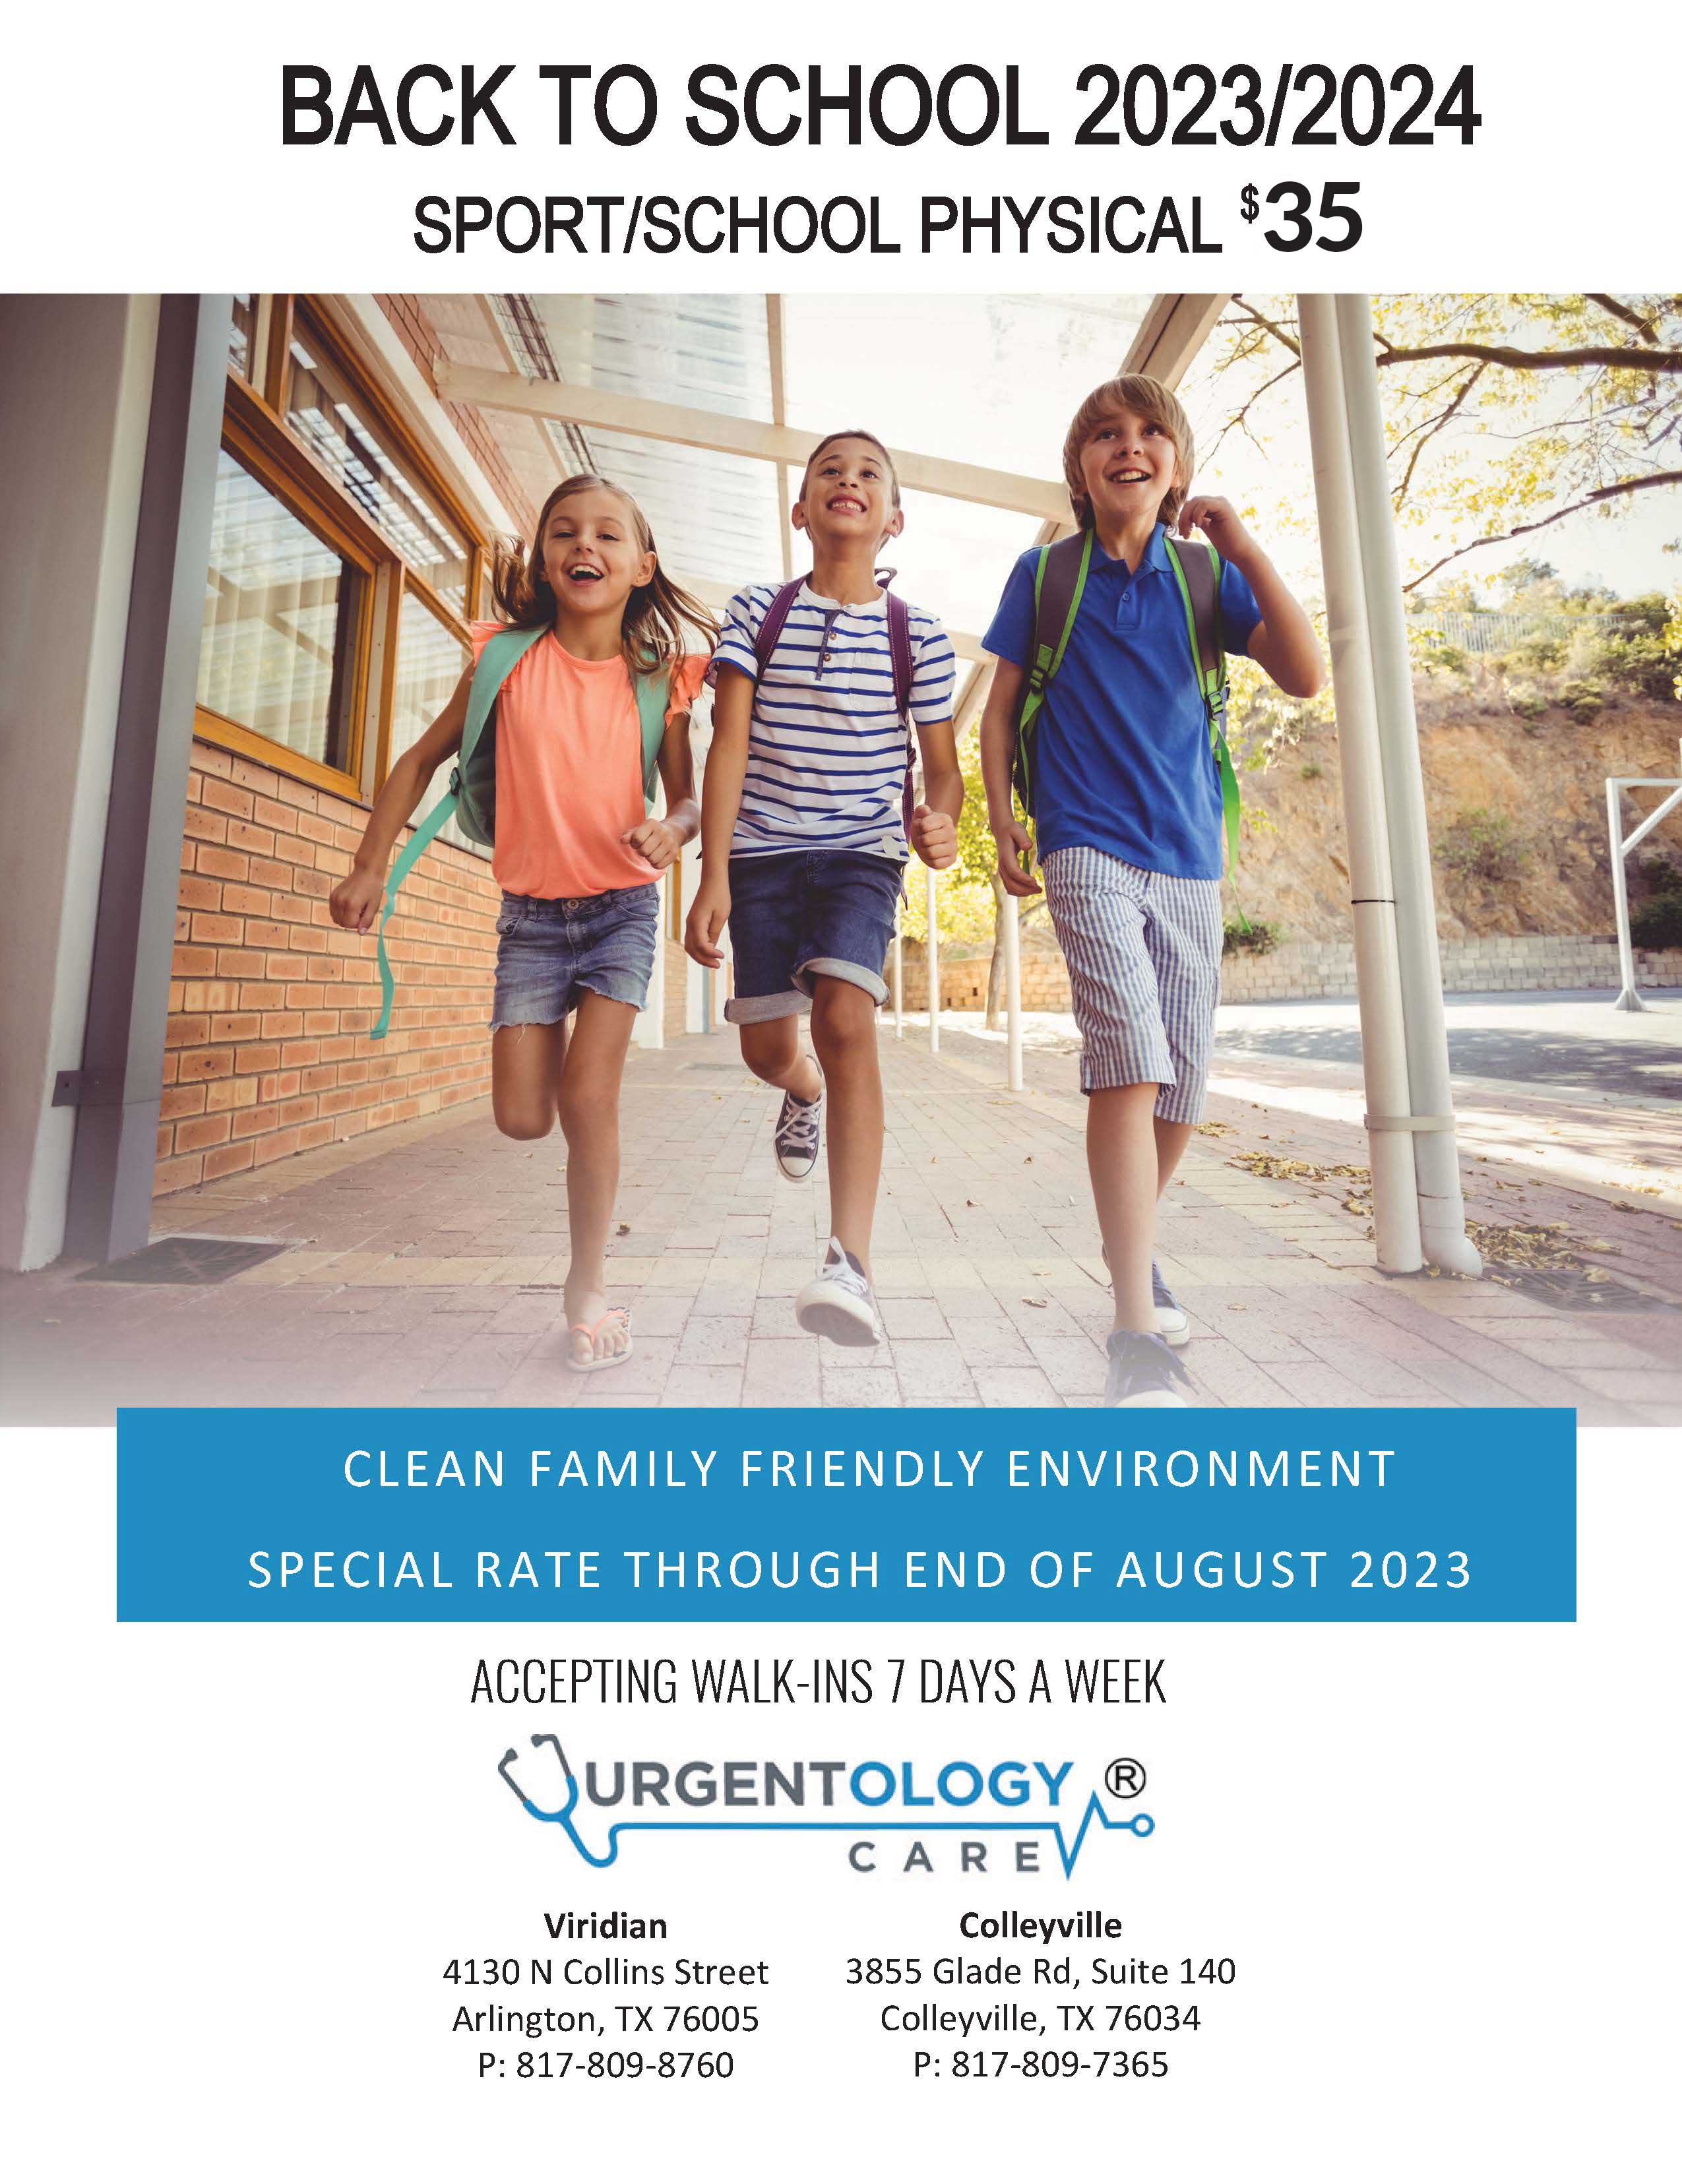 Urgentology Care School Physicals Small Flier 2023 2024